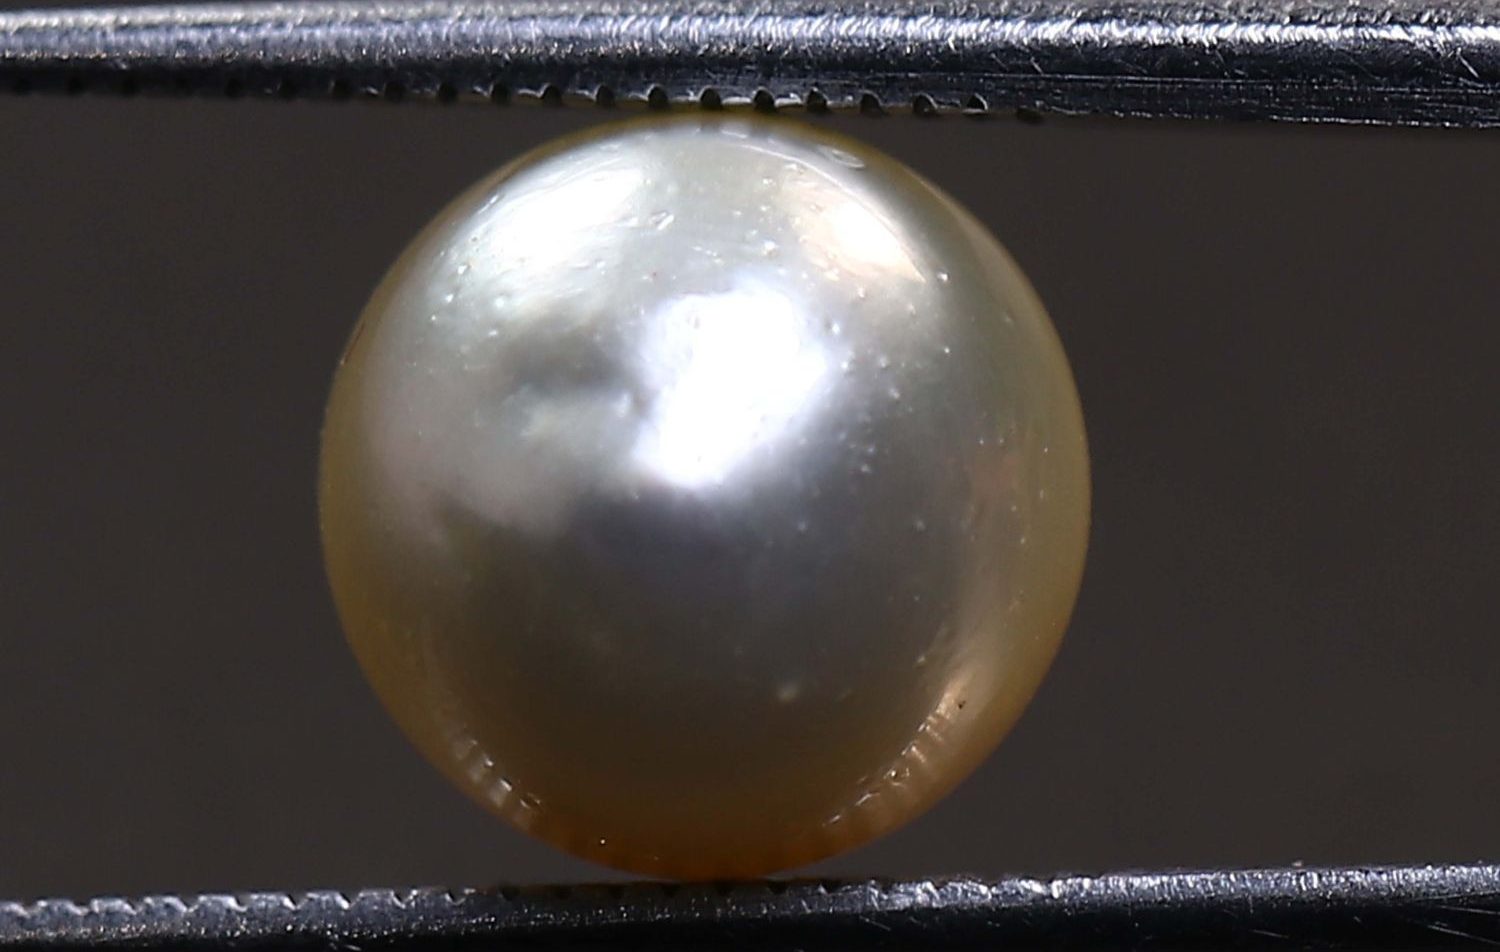 PEARL 5.81 Ct.